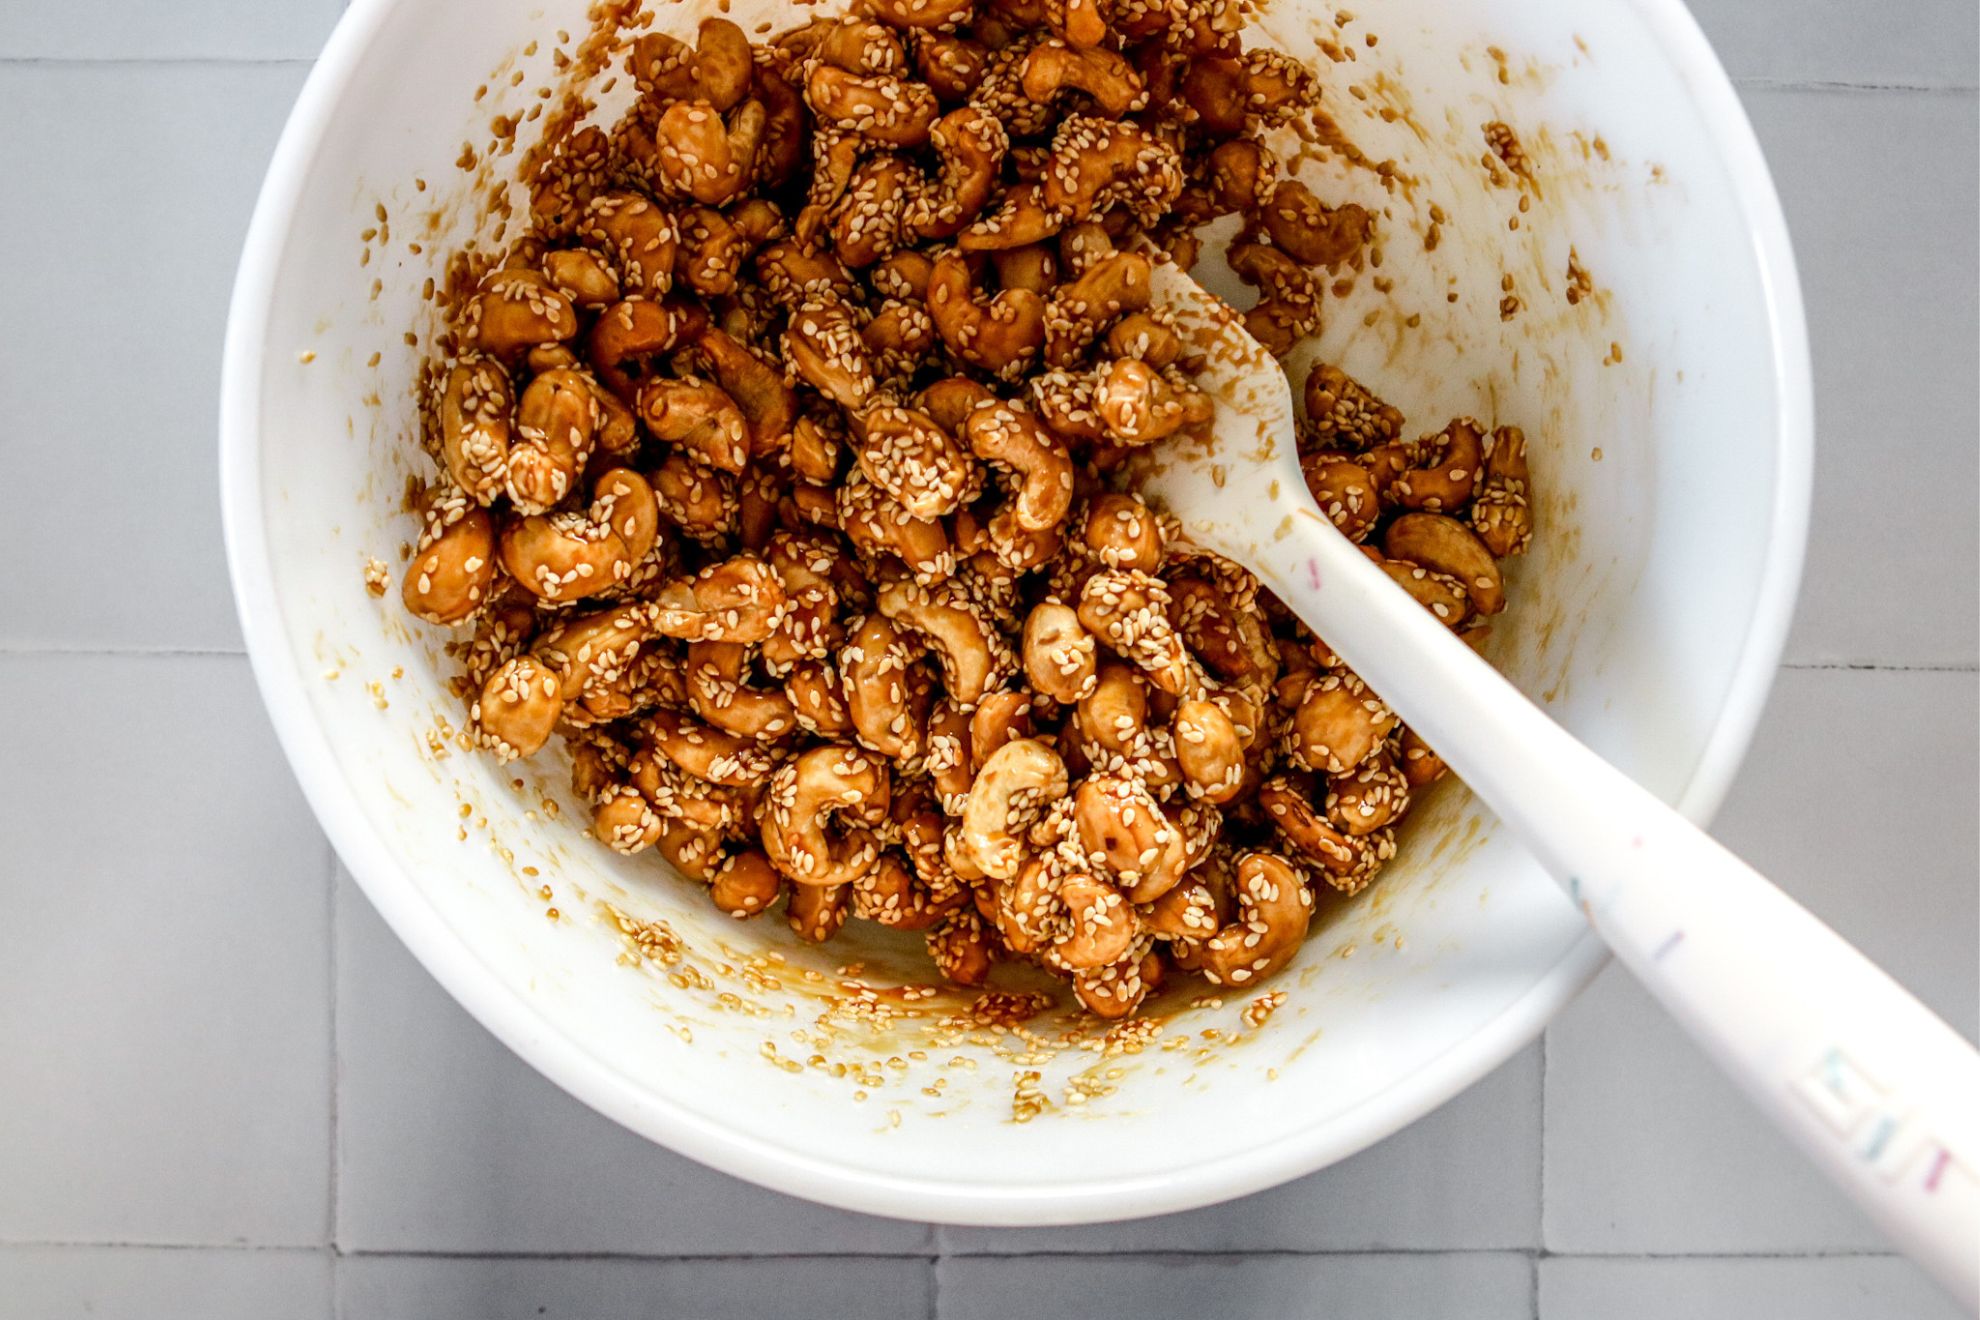 This is an overhead horizontal image of a large white bowl on a white square tile surface. In the bowl are cashews coated with sesame seeds and a caramel sauce. A white rubber spatula is in the bowl with the handle leaning against the side of the bowl pointing to the bottom right of the image.